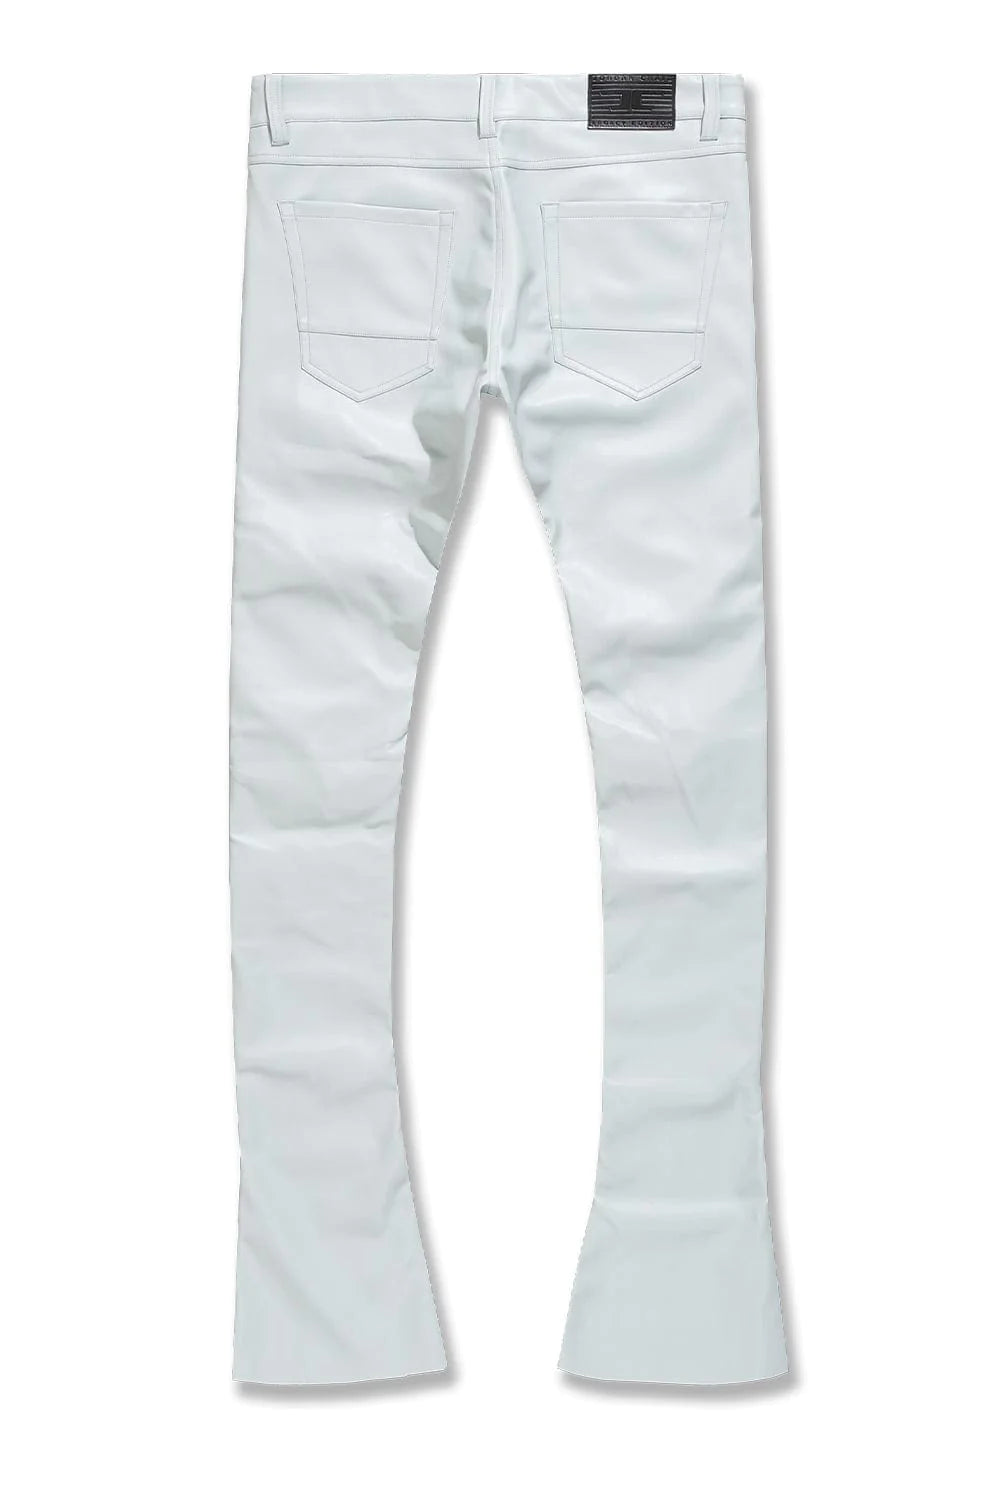 ROSS STACKED - MONTE CARLO PANTS (LIGHT GREY) JRF1135